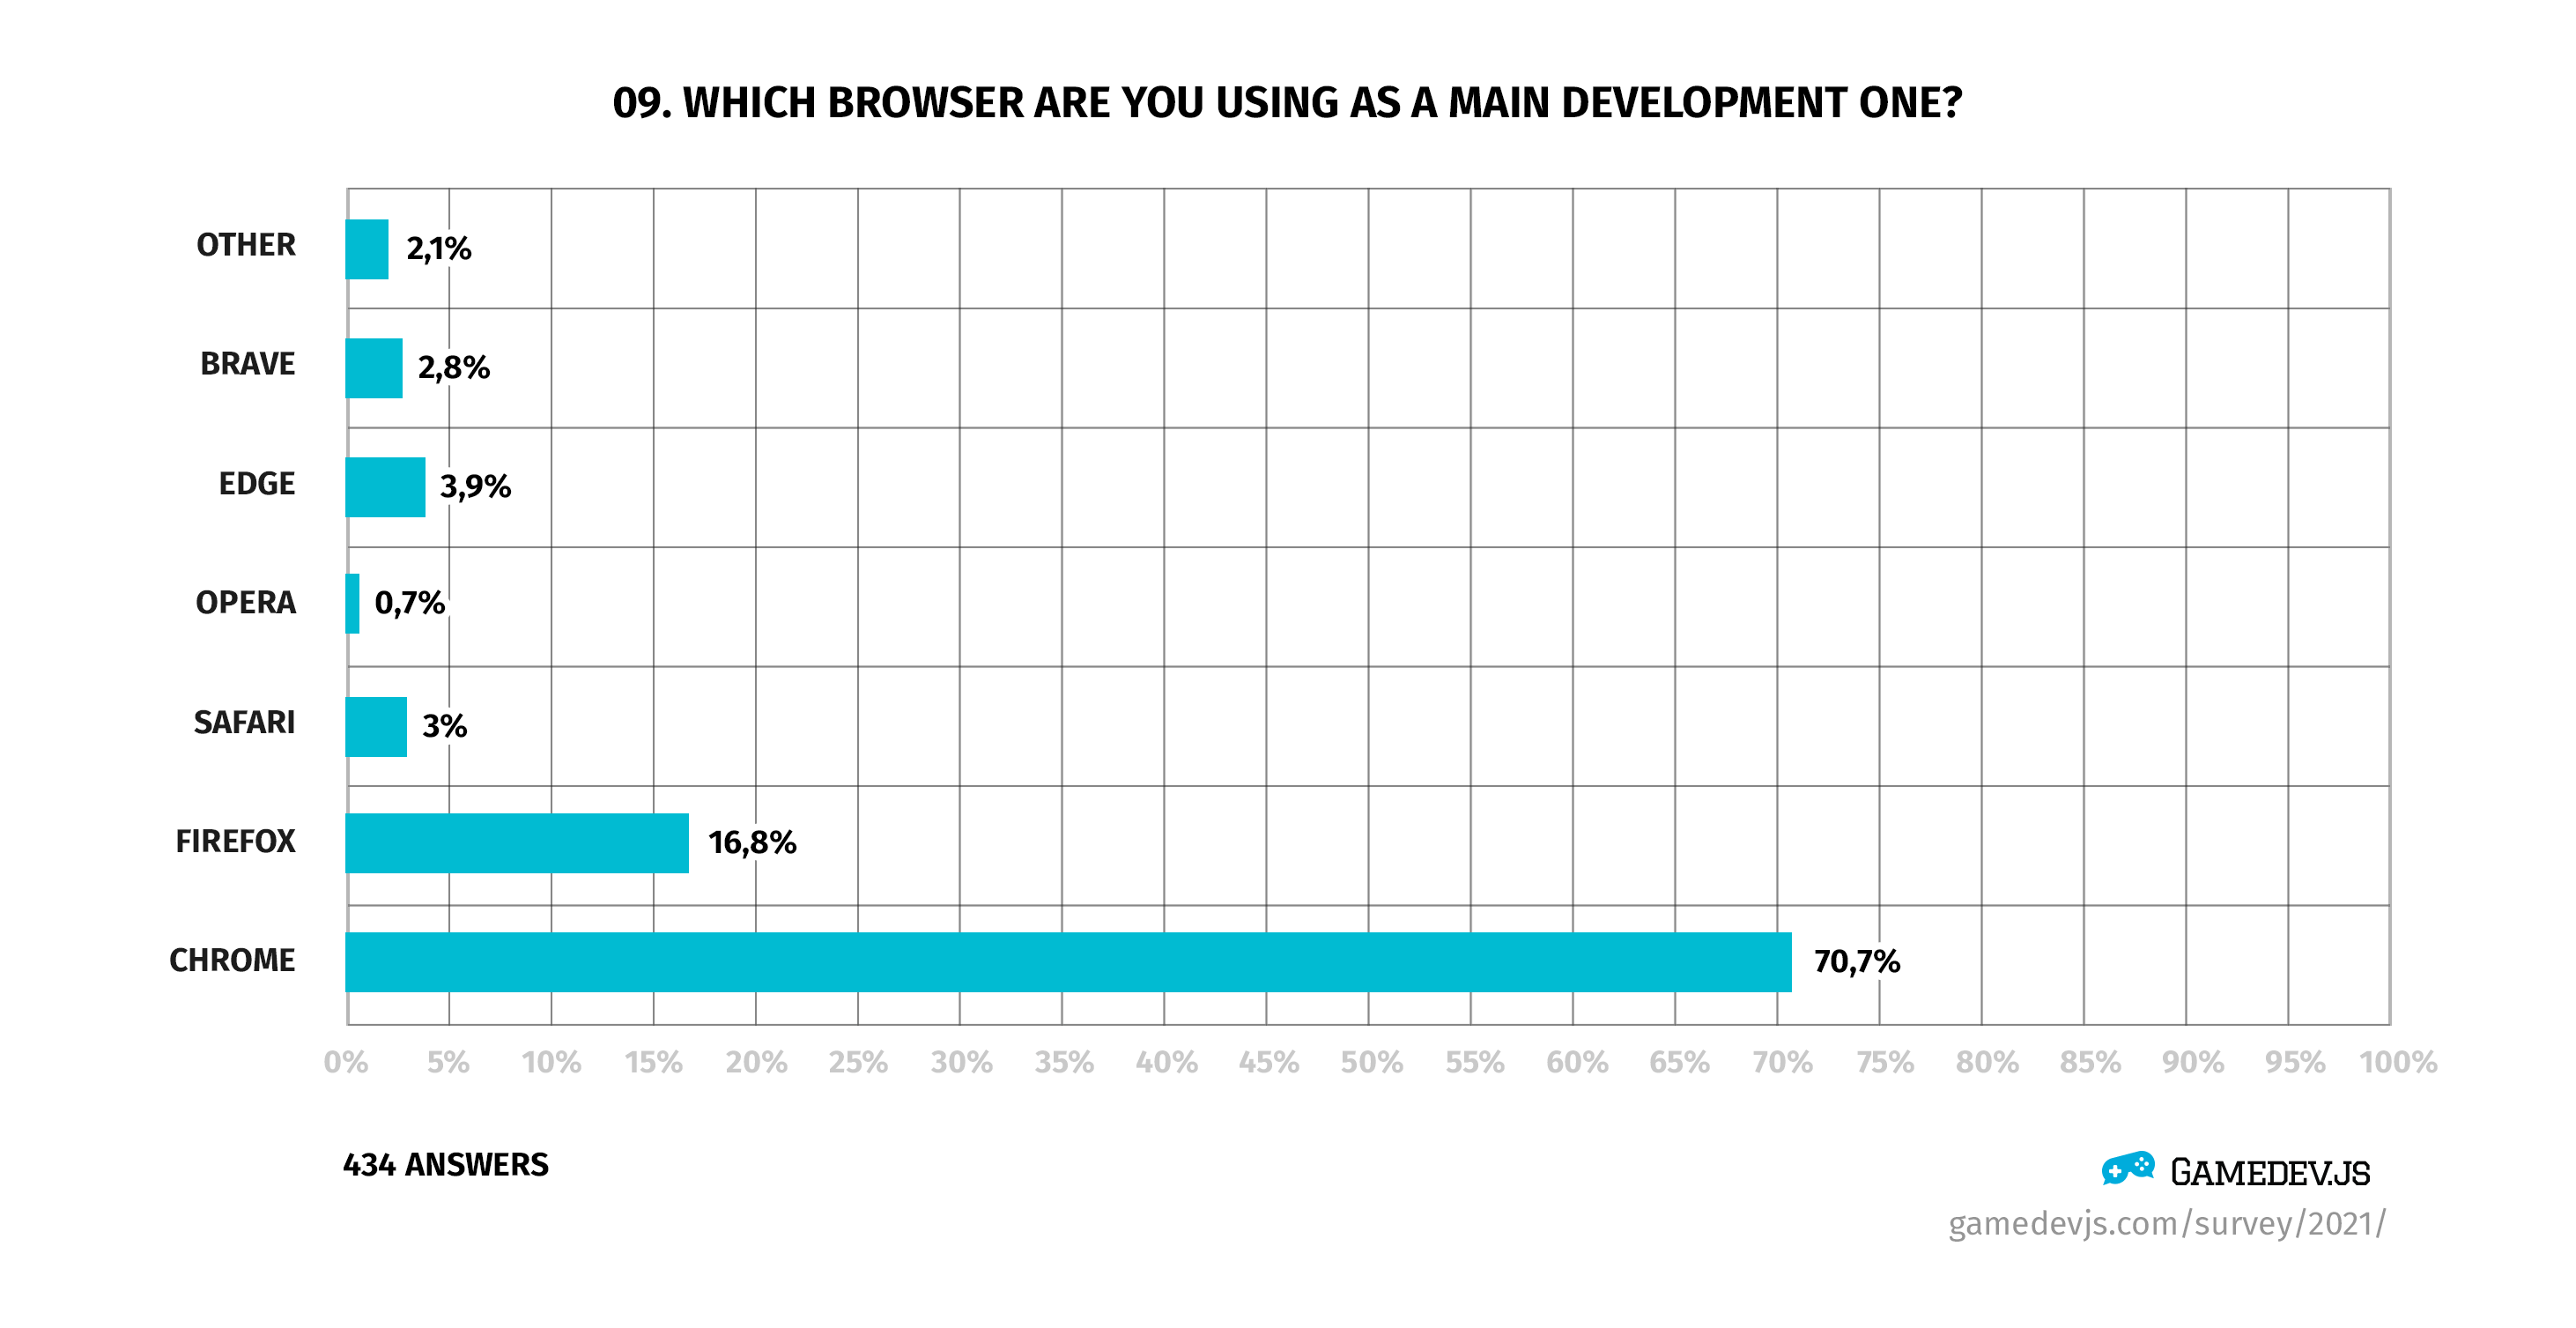 Gamedev.js Survey 2021 - Question #9: Which browser are you using as a main development one?